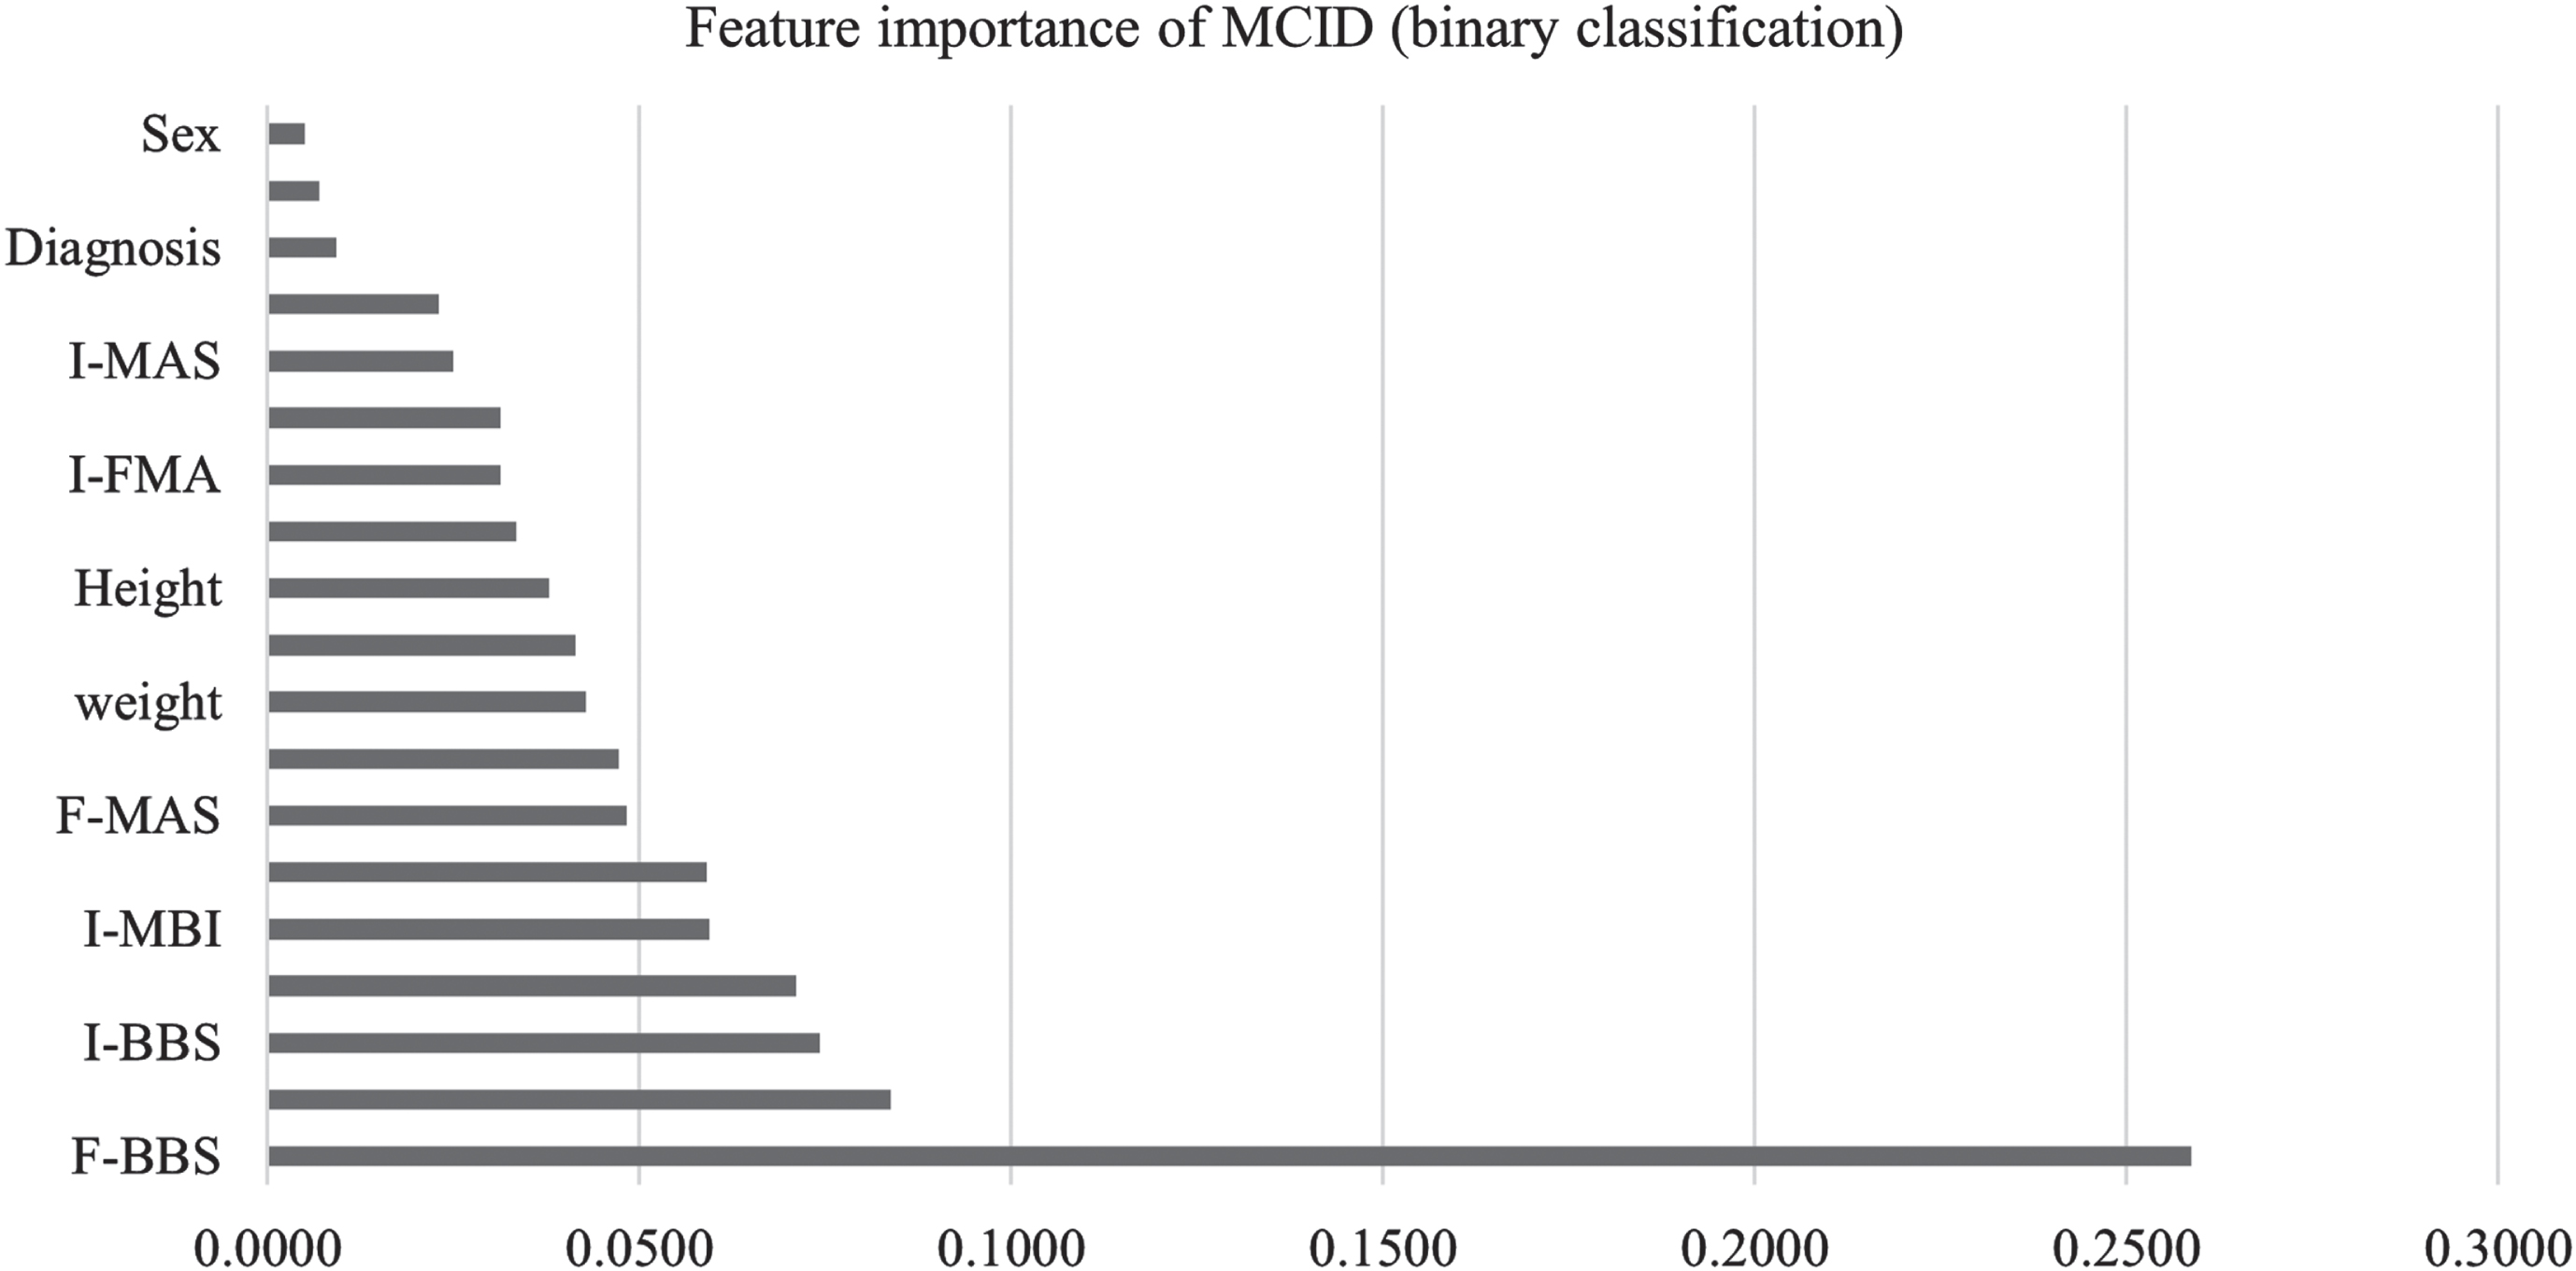 Feature importance of MCID (binary classification).